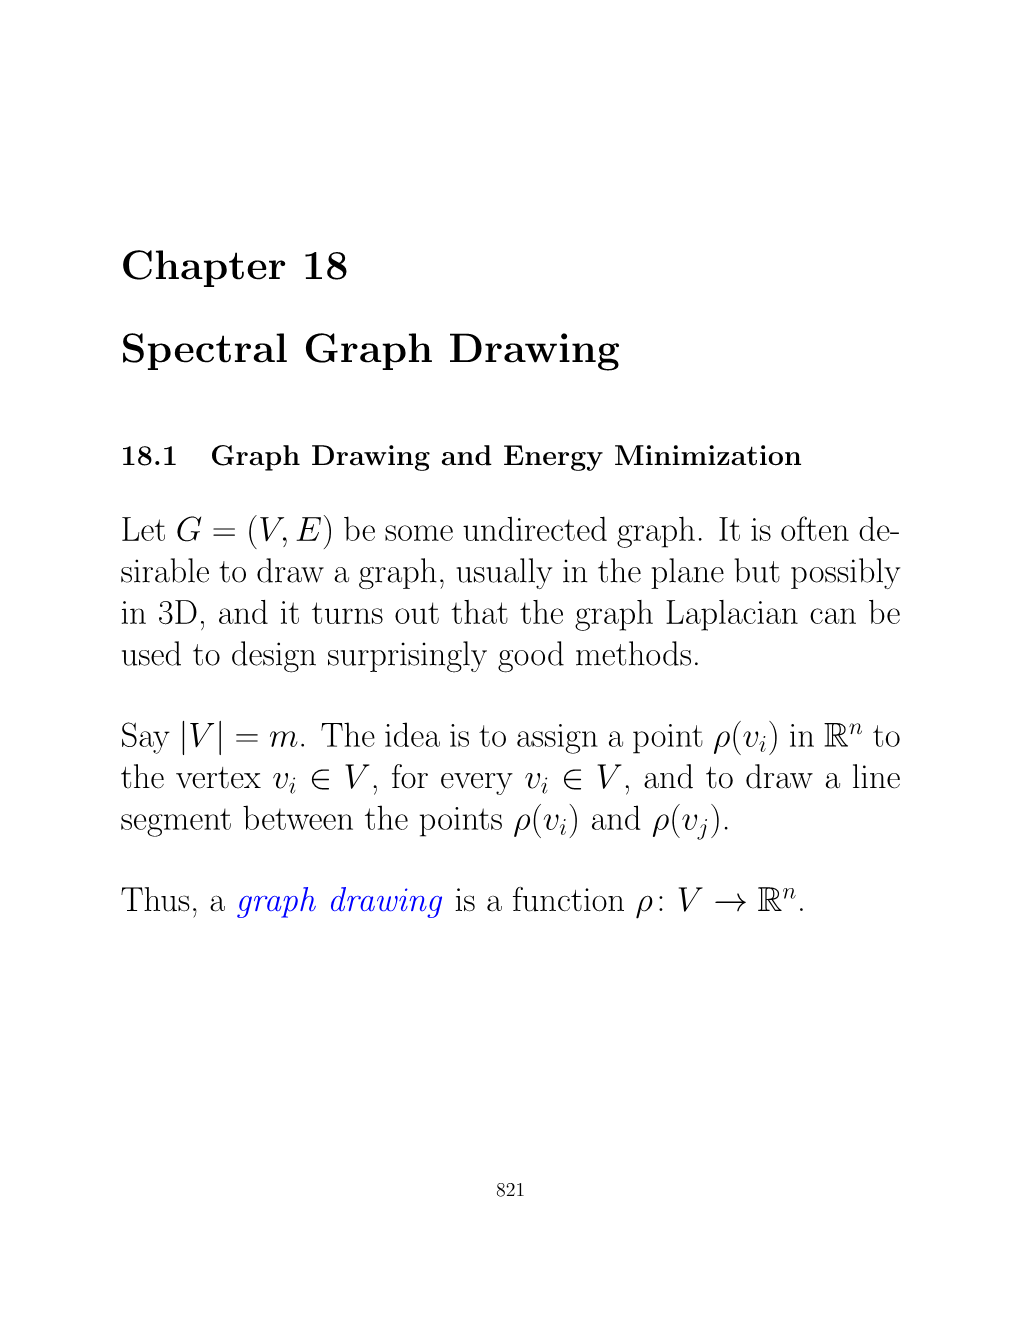 Chapter 18 Spectral Graph Drawing